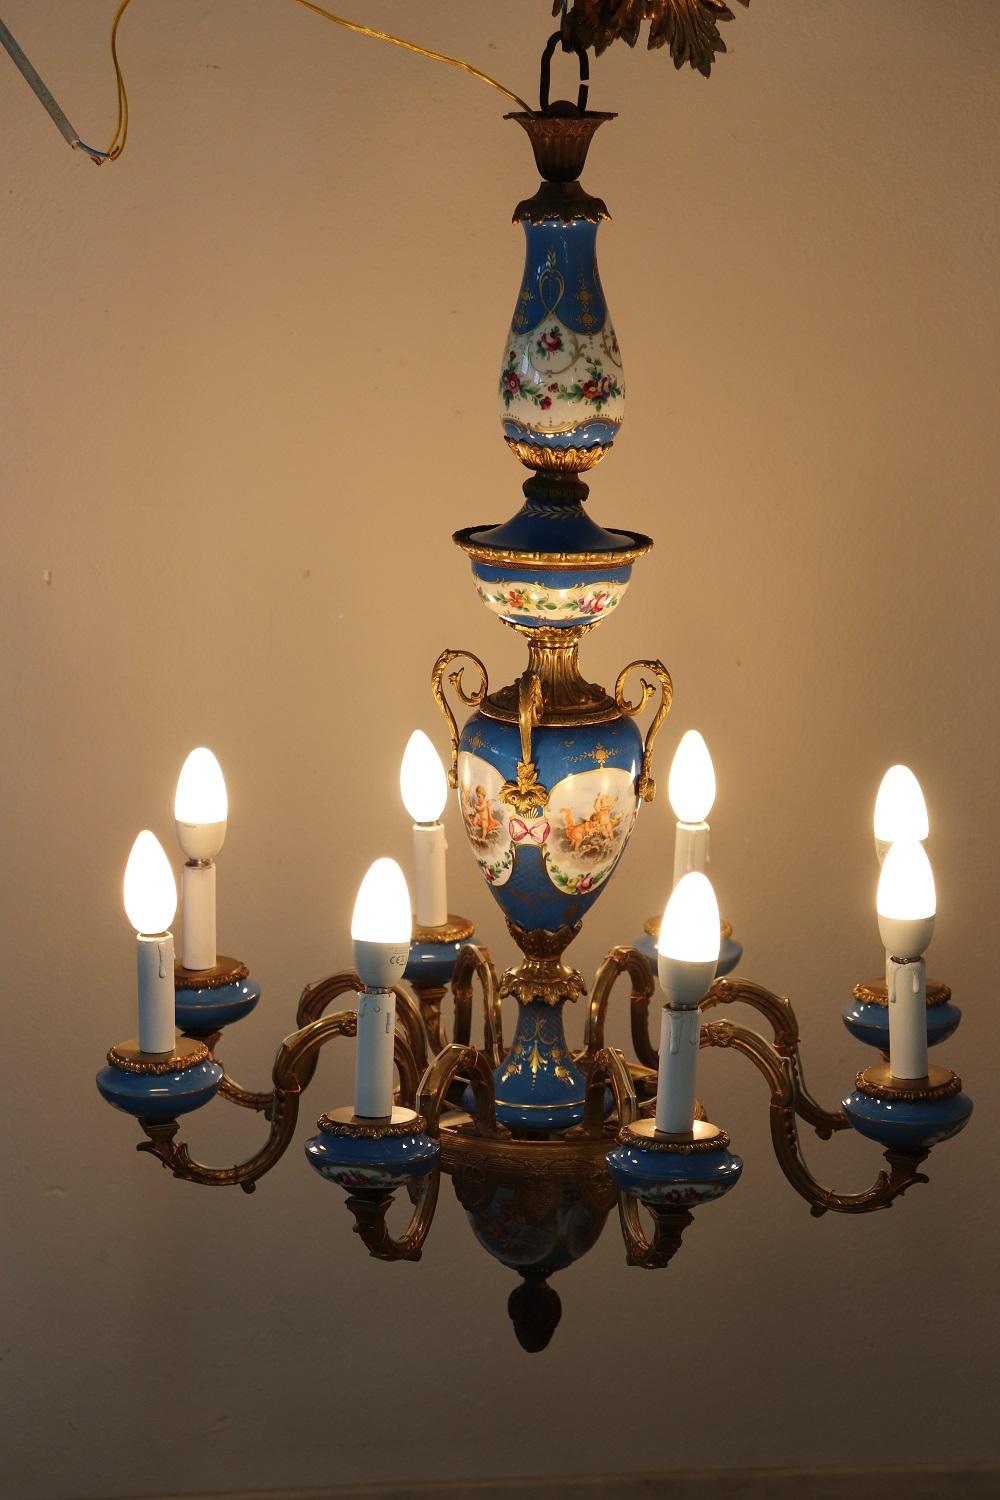 Splendid Napoleon III chandelier in gilded bronze and fine sevres porcelain with 8 lights, 1880s. The bronze is finely chiseled. The porcelain in the colors of blue is hand painted with a refined floral decoration. Some scenes with delicate little